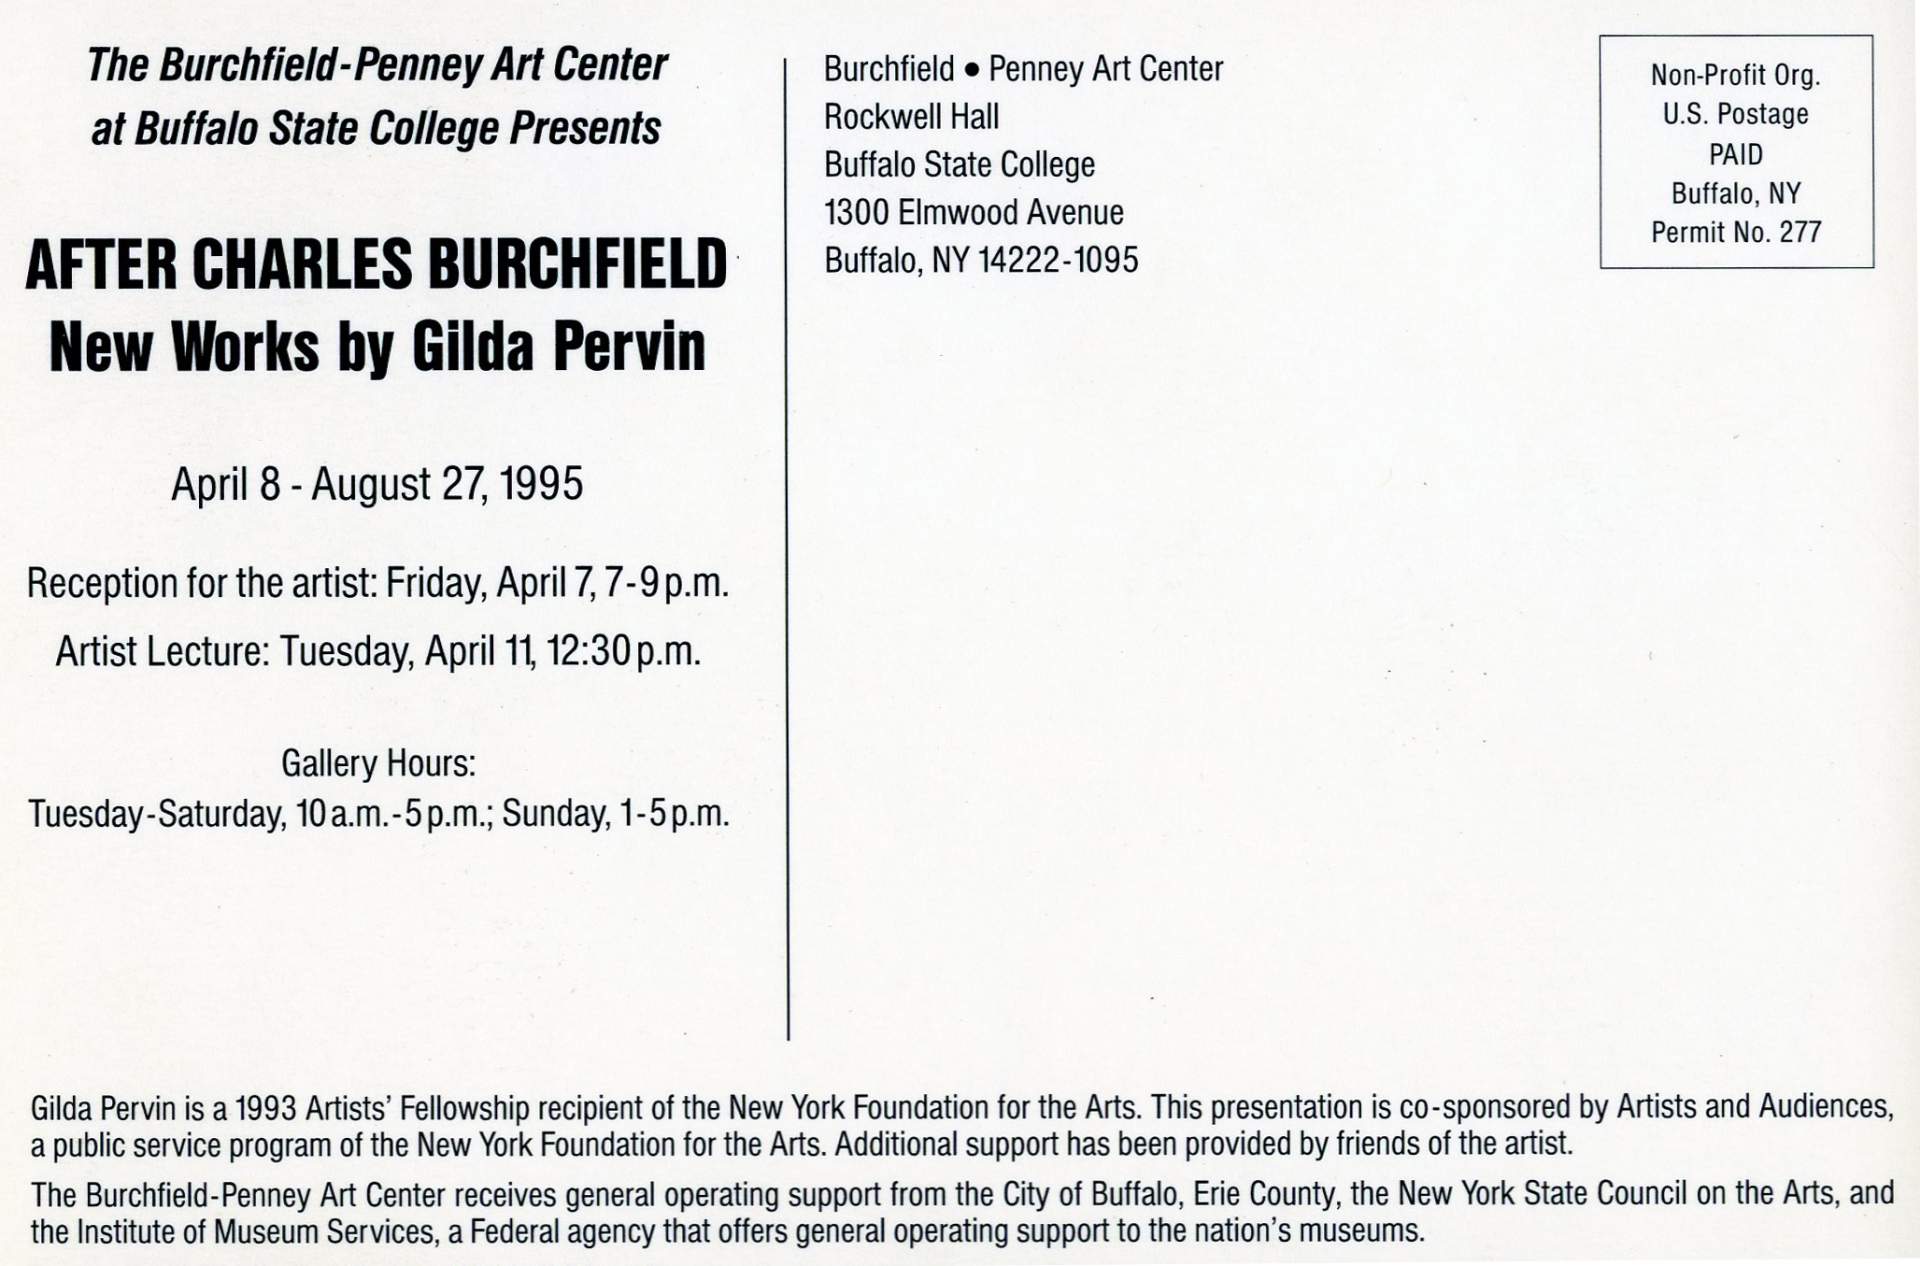 "After Charles Burchfield: New Works by Gilda Pervin" invitation postcard